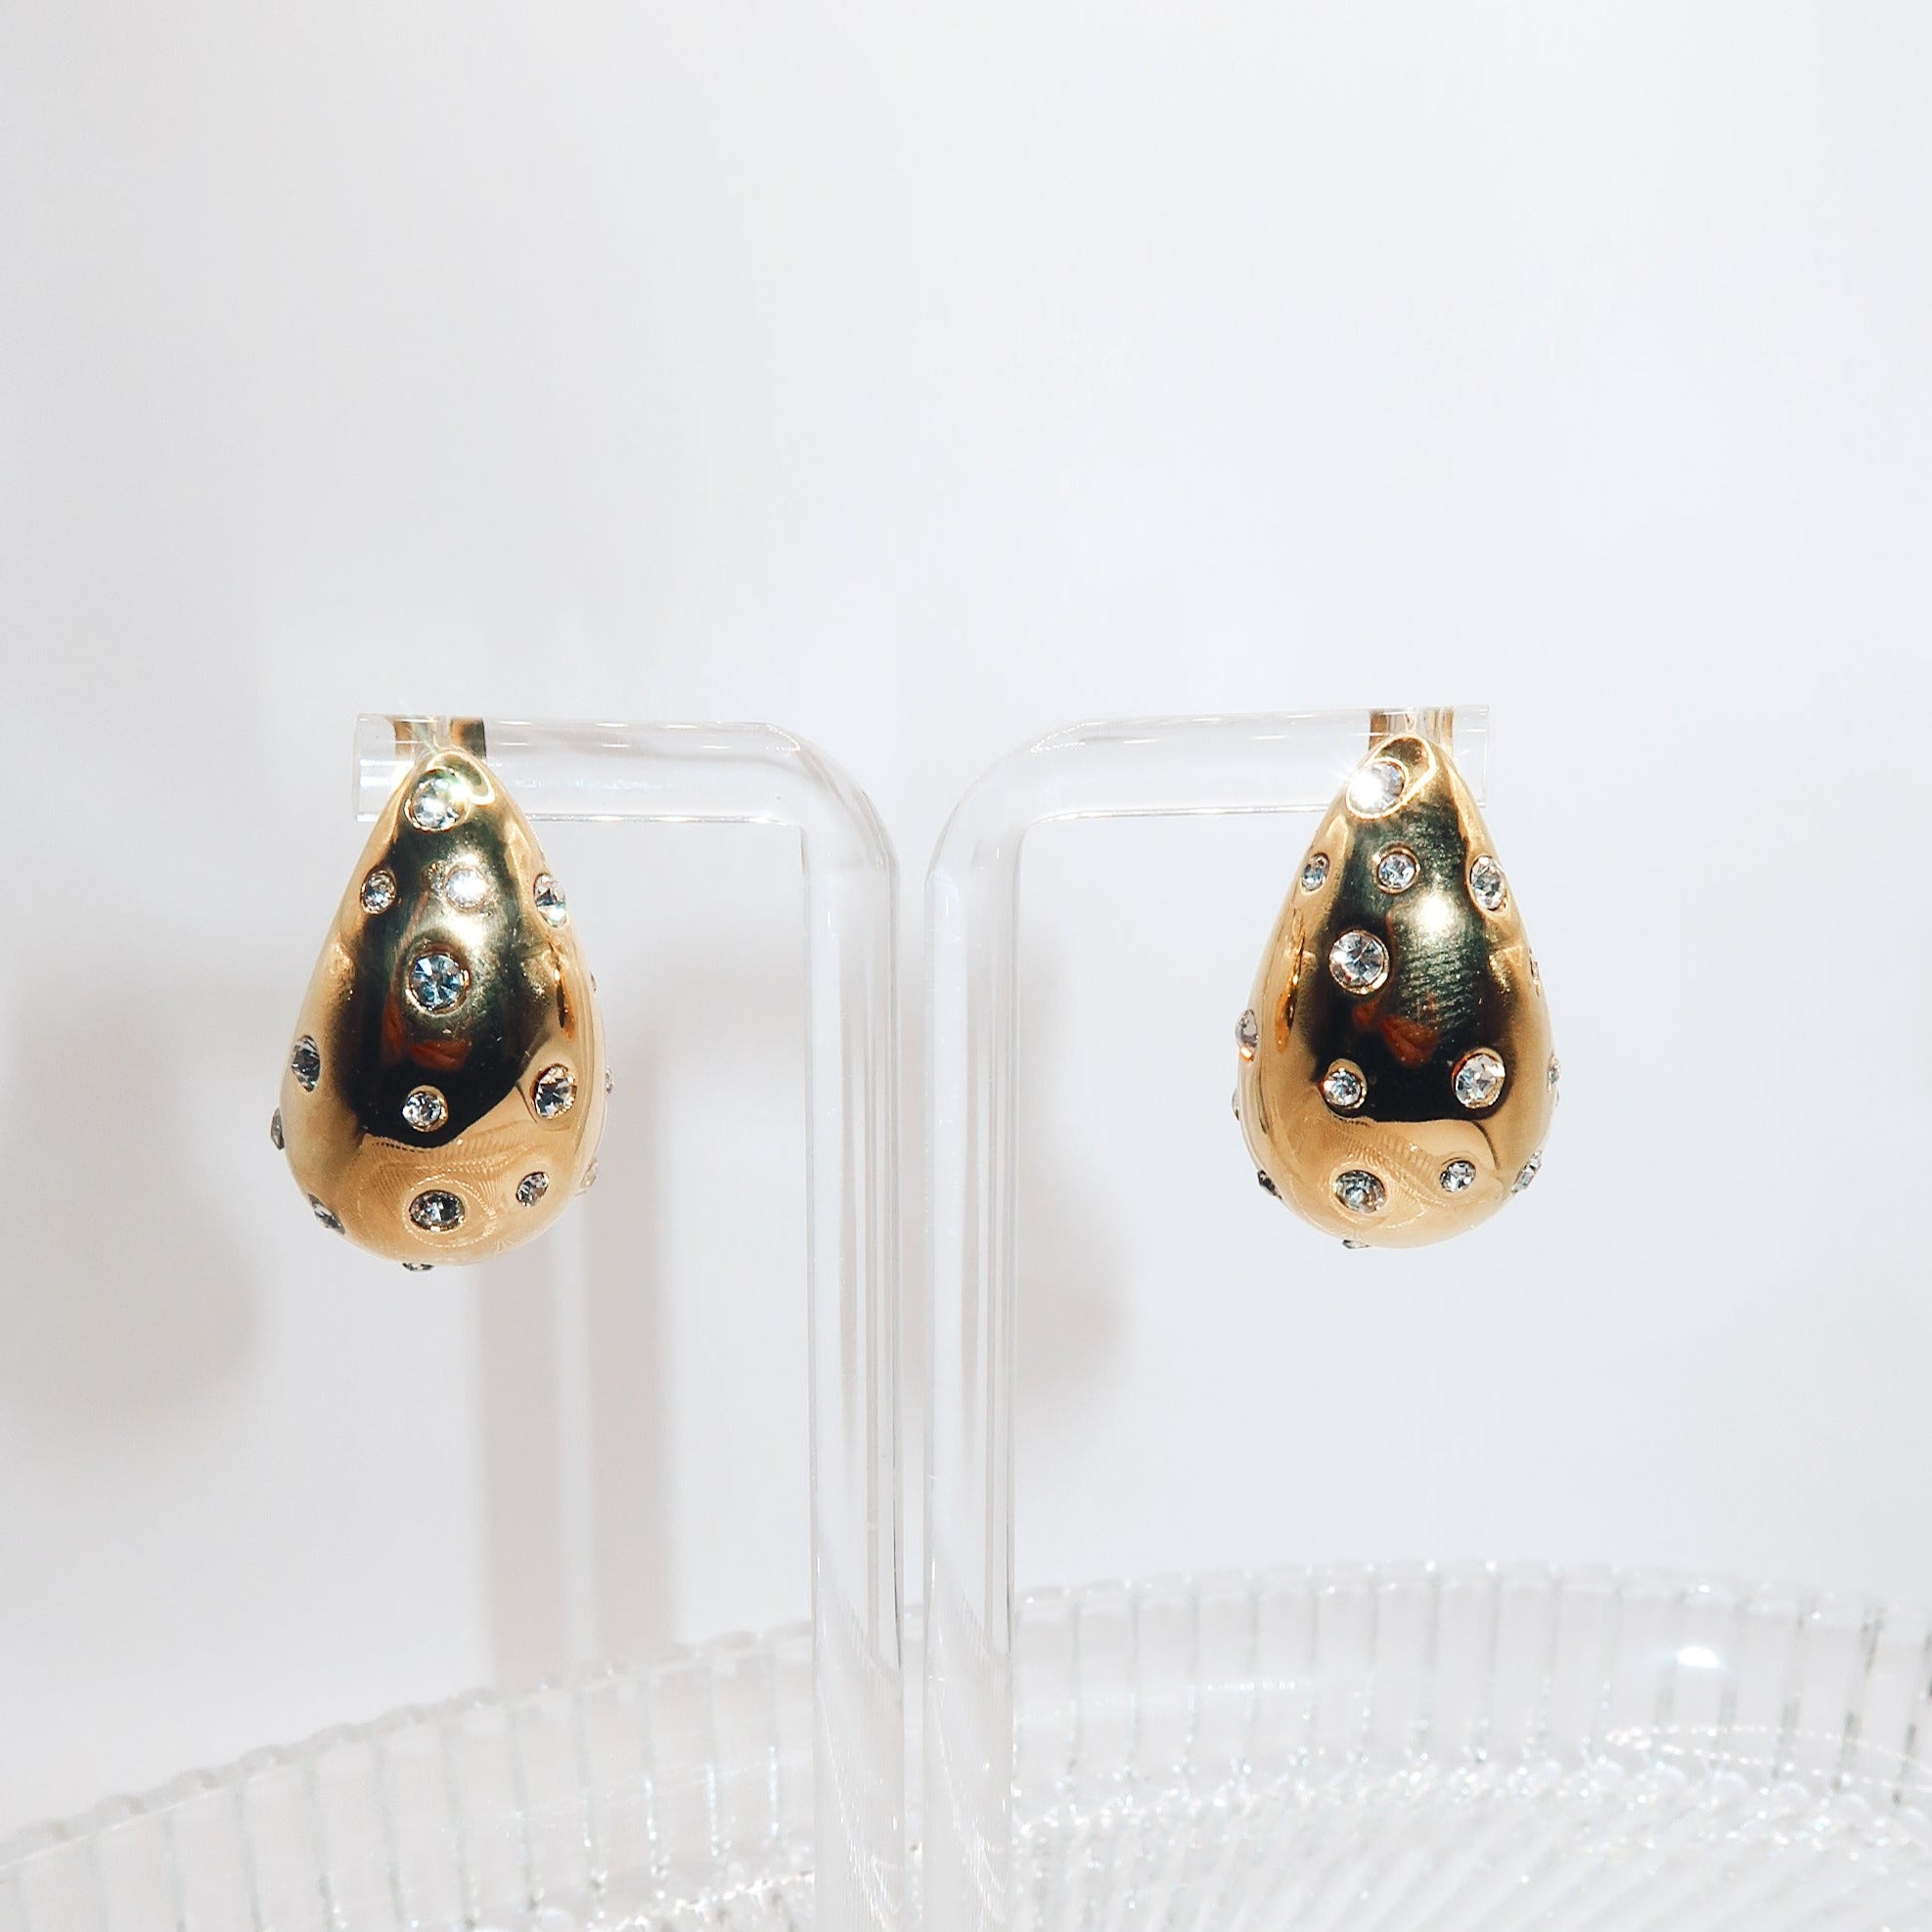 ROME - 18K PVD Gold Plated Teardrop Earrings with CZ Stones - Mixed Metals